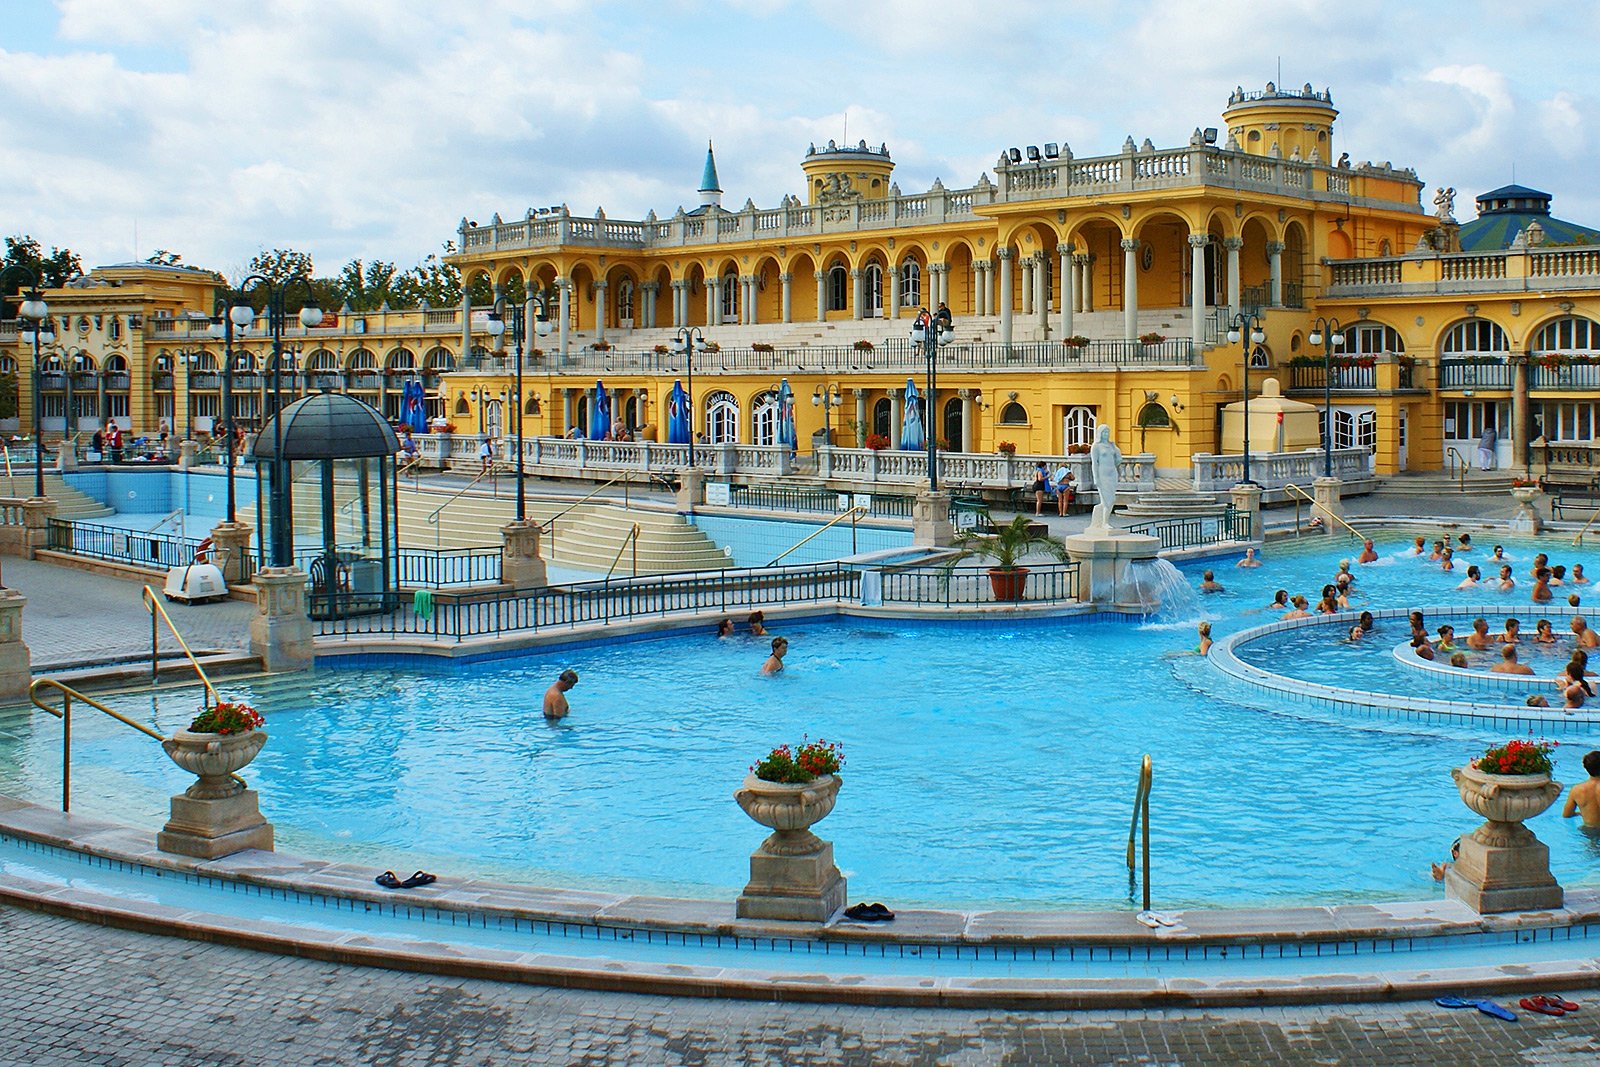 How to relax in the Szechenyi Bath in Budapest